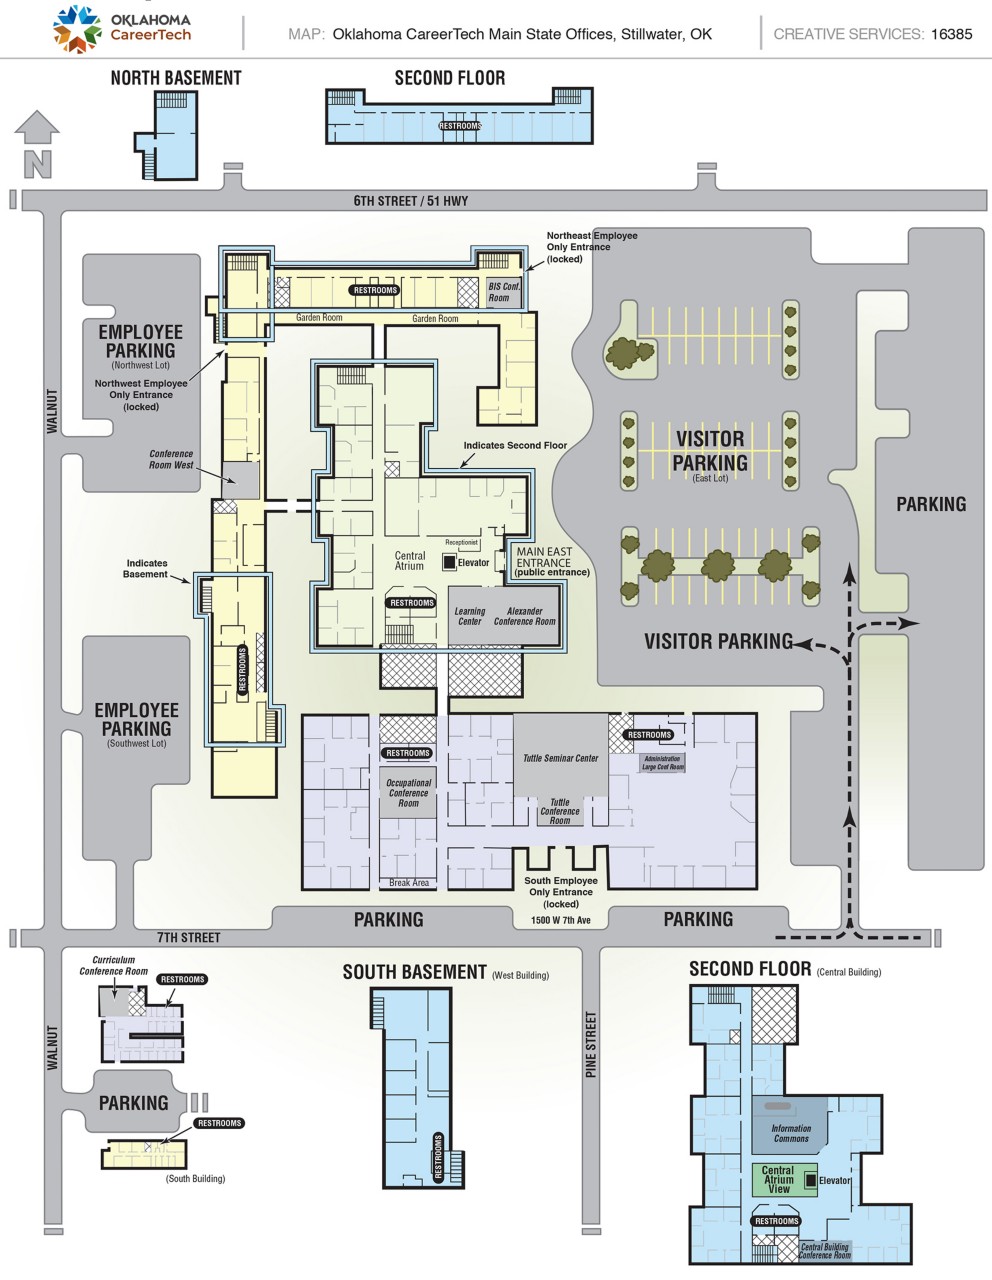 Map of the CareerTech agency with only the public areas and parking defined.